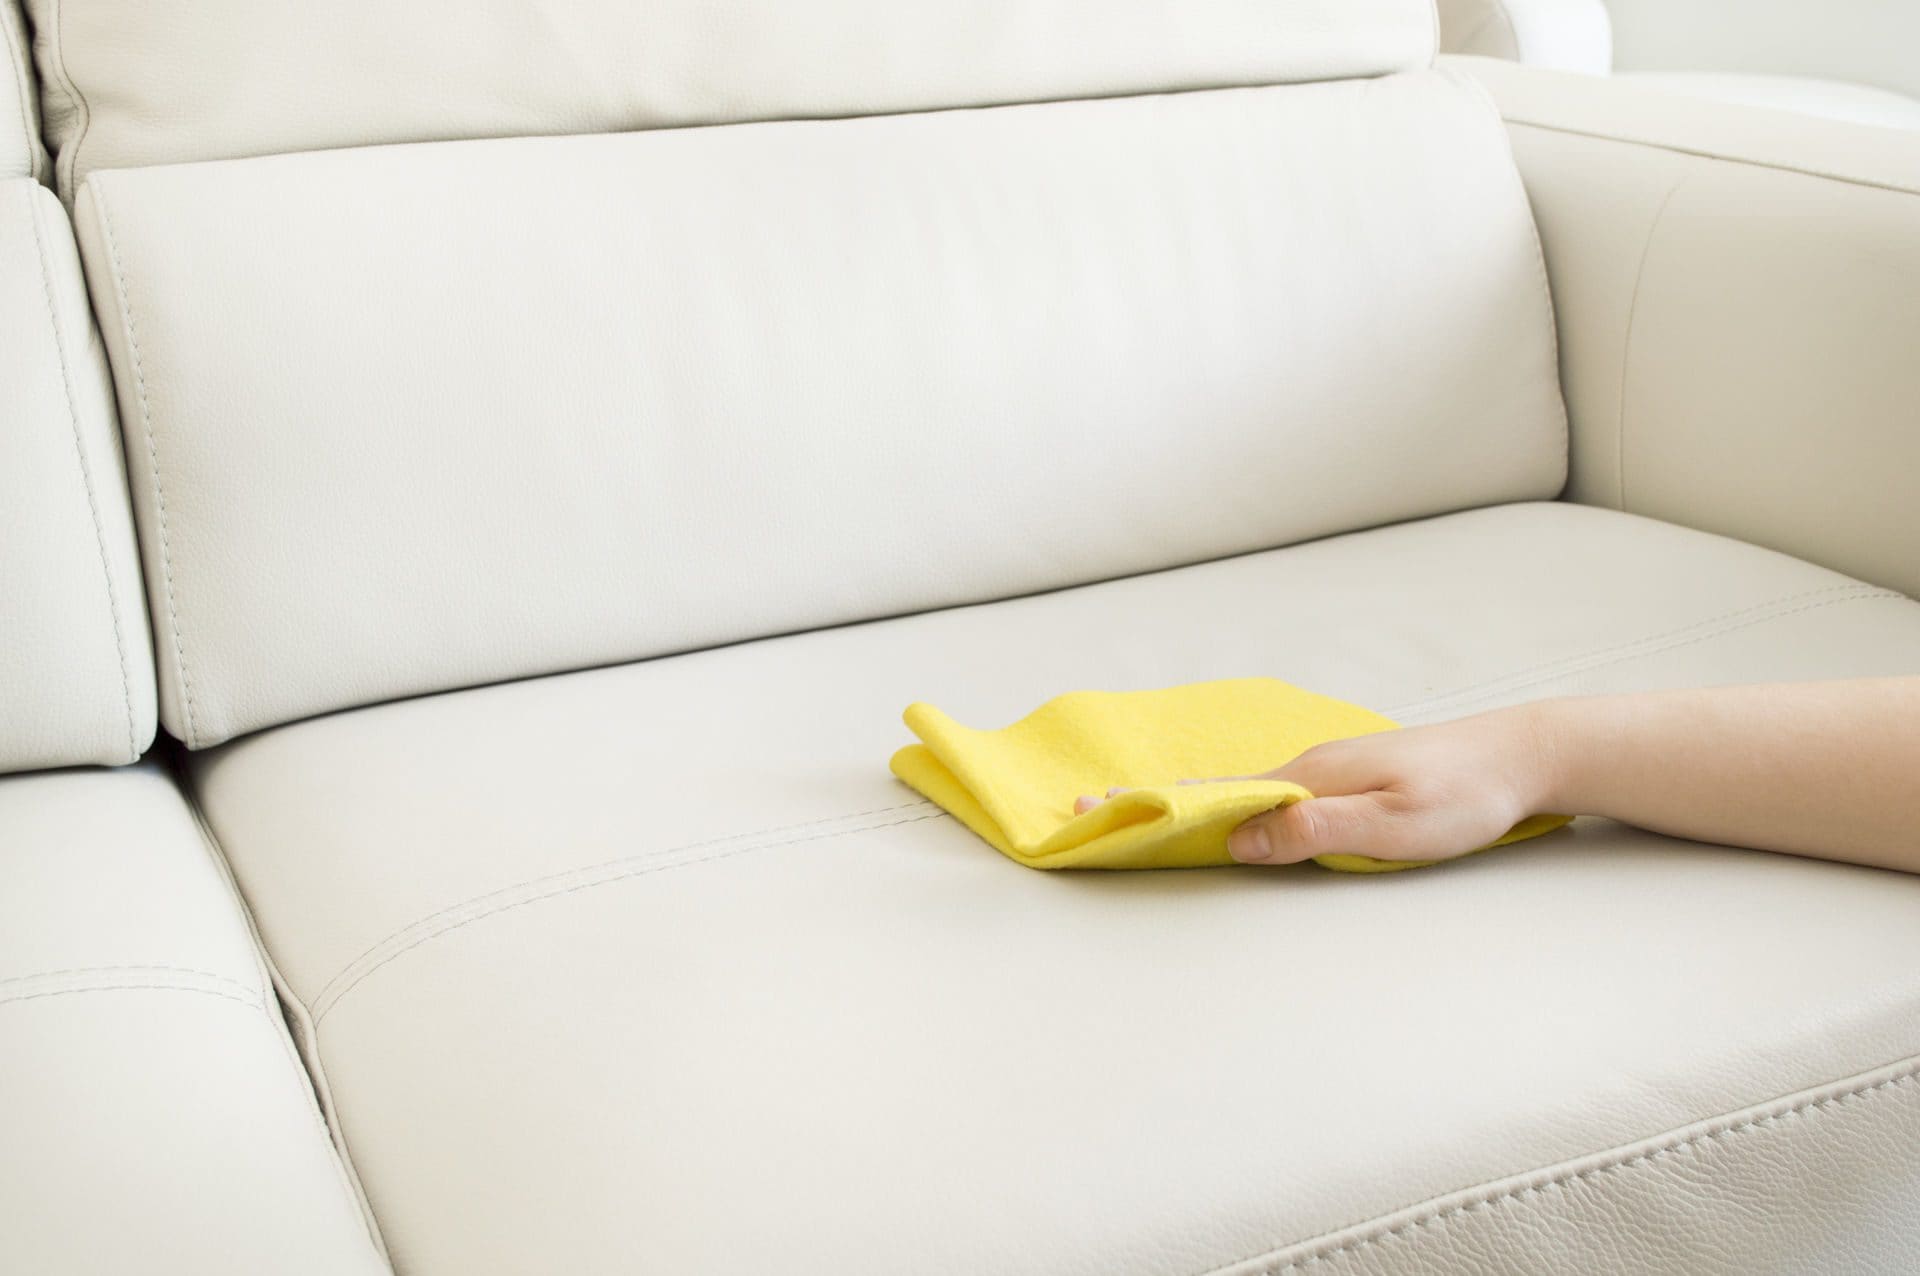 How To Get Rid Of Urine Smell On Sofa